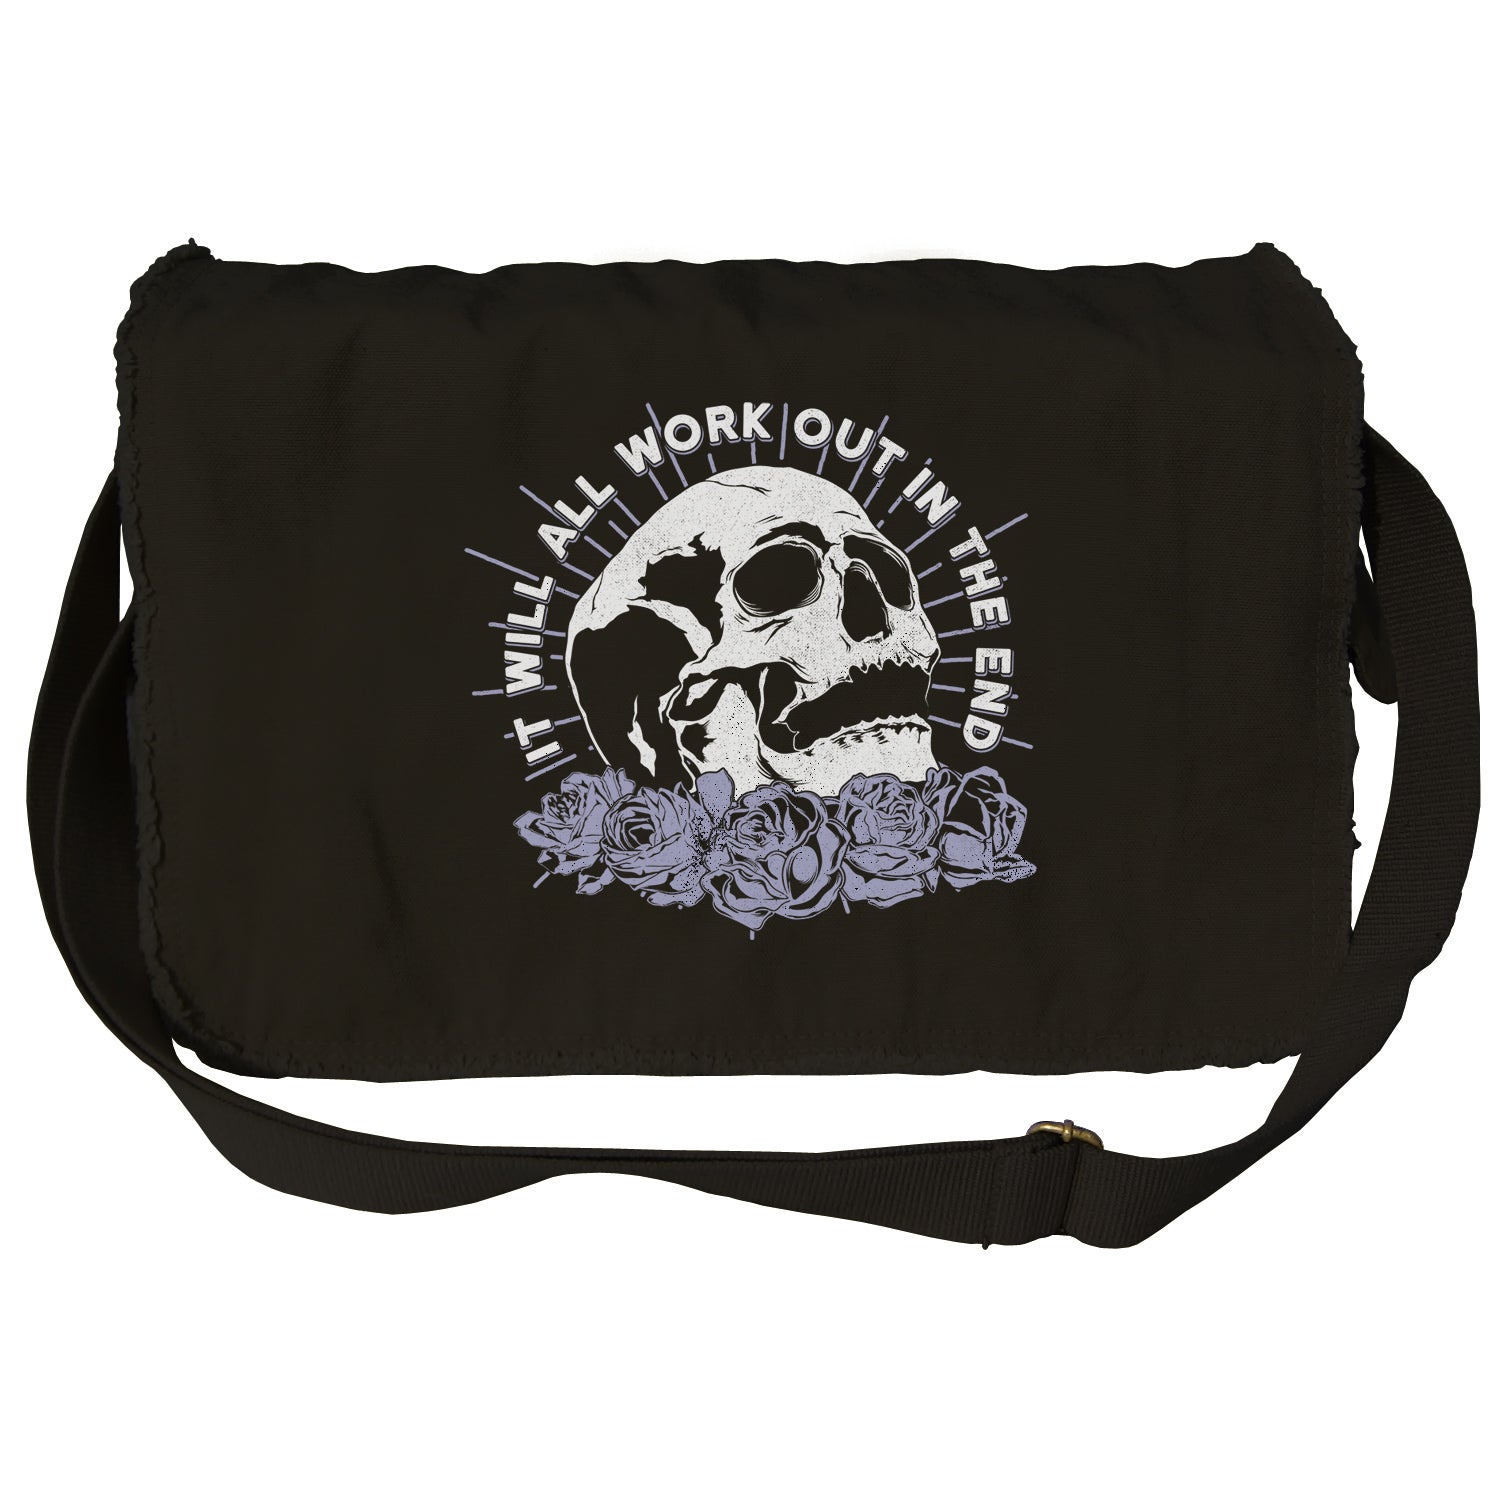 It Will All Work Out In The End Messenger Bag